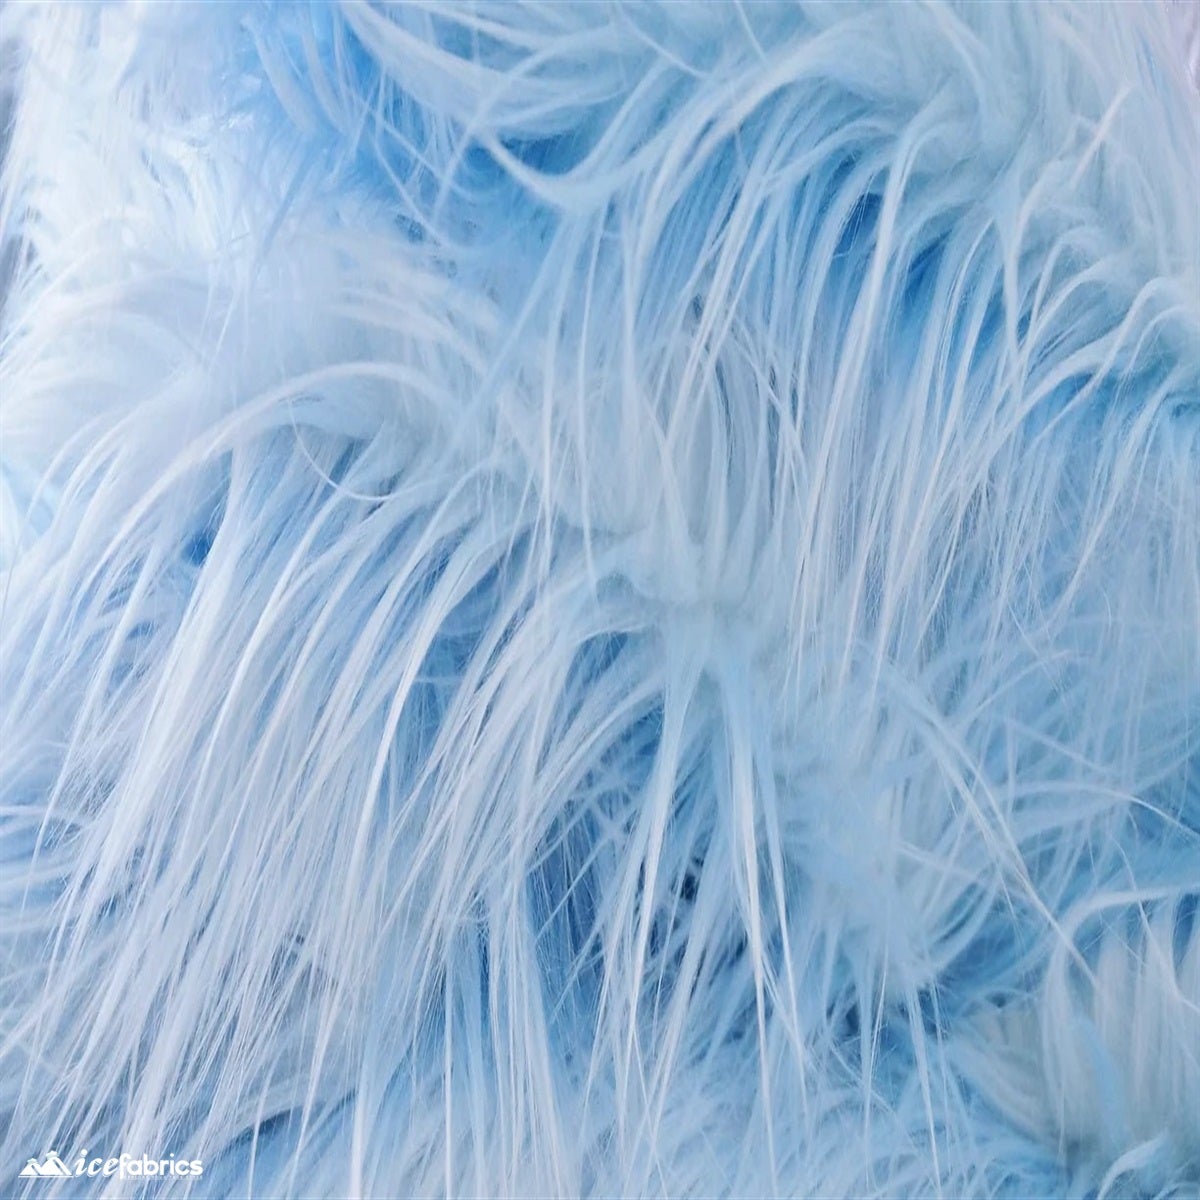 Mohair Faux Fur Fabric By The Roll (20 Yards) 4 Inch PileICE FABRICSICE FABRICSBlueBy The Roll (60" Wide)Mohair Faux Fur Fabric By The Roll (20 Yards) 4 Inch Pile ICE FABRICS